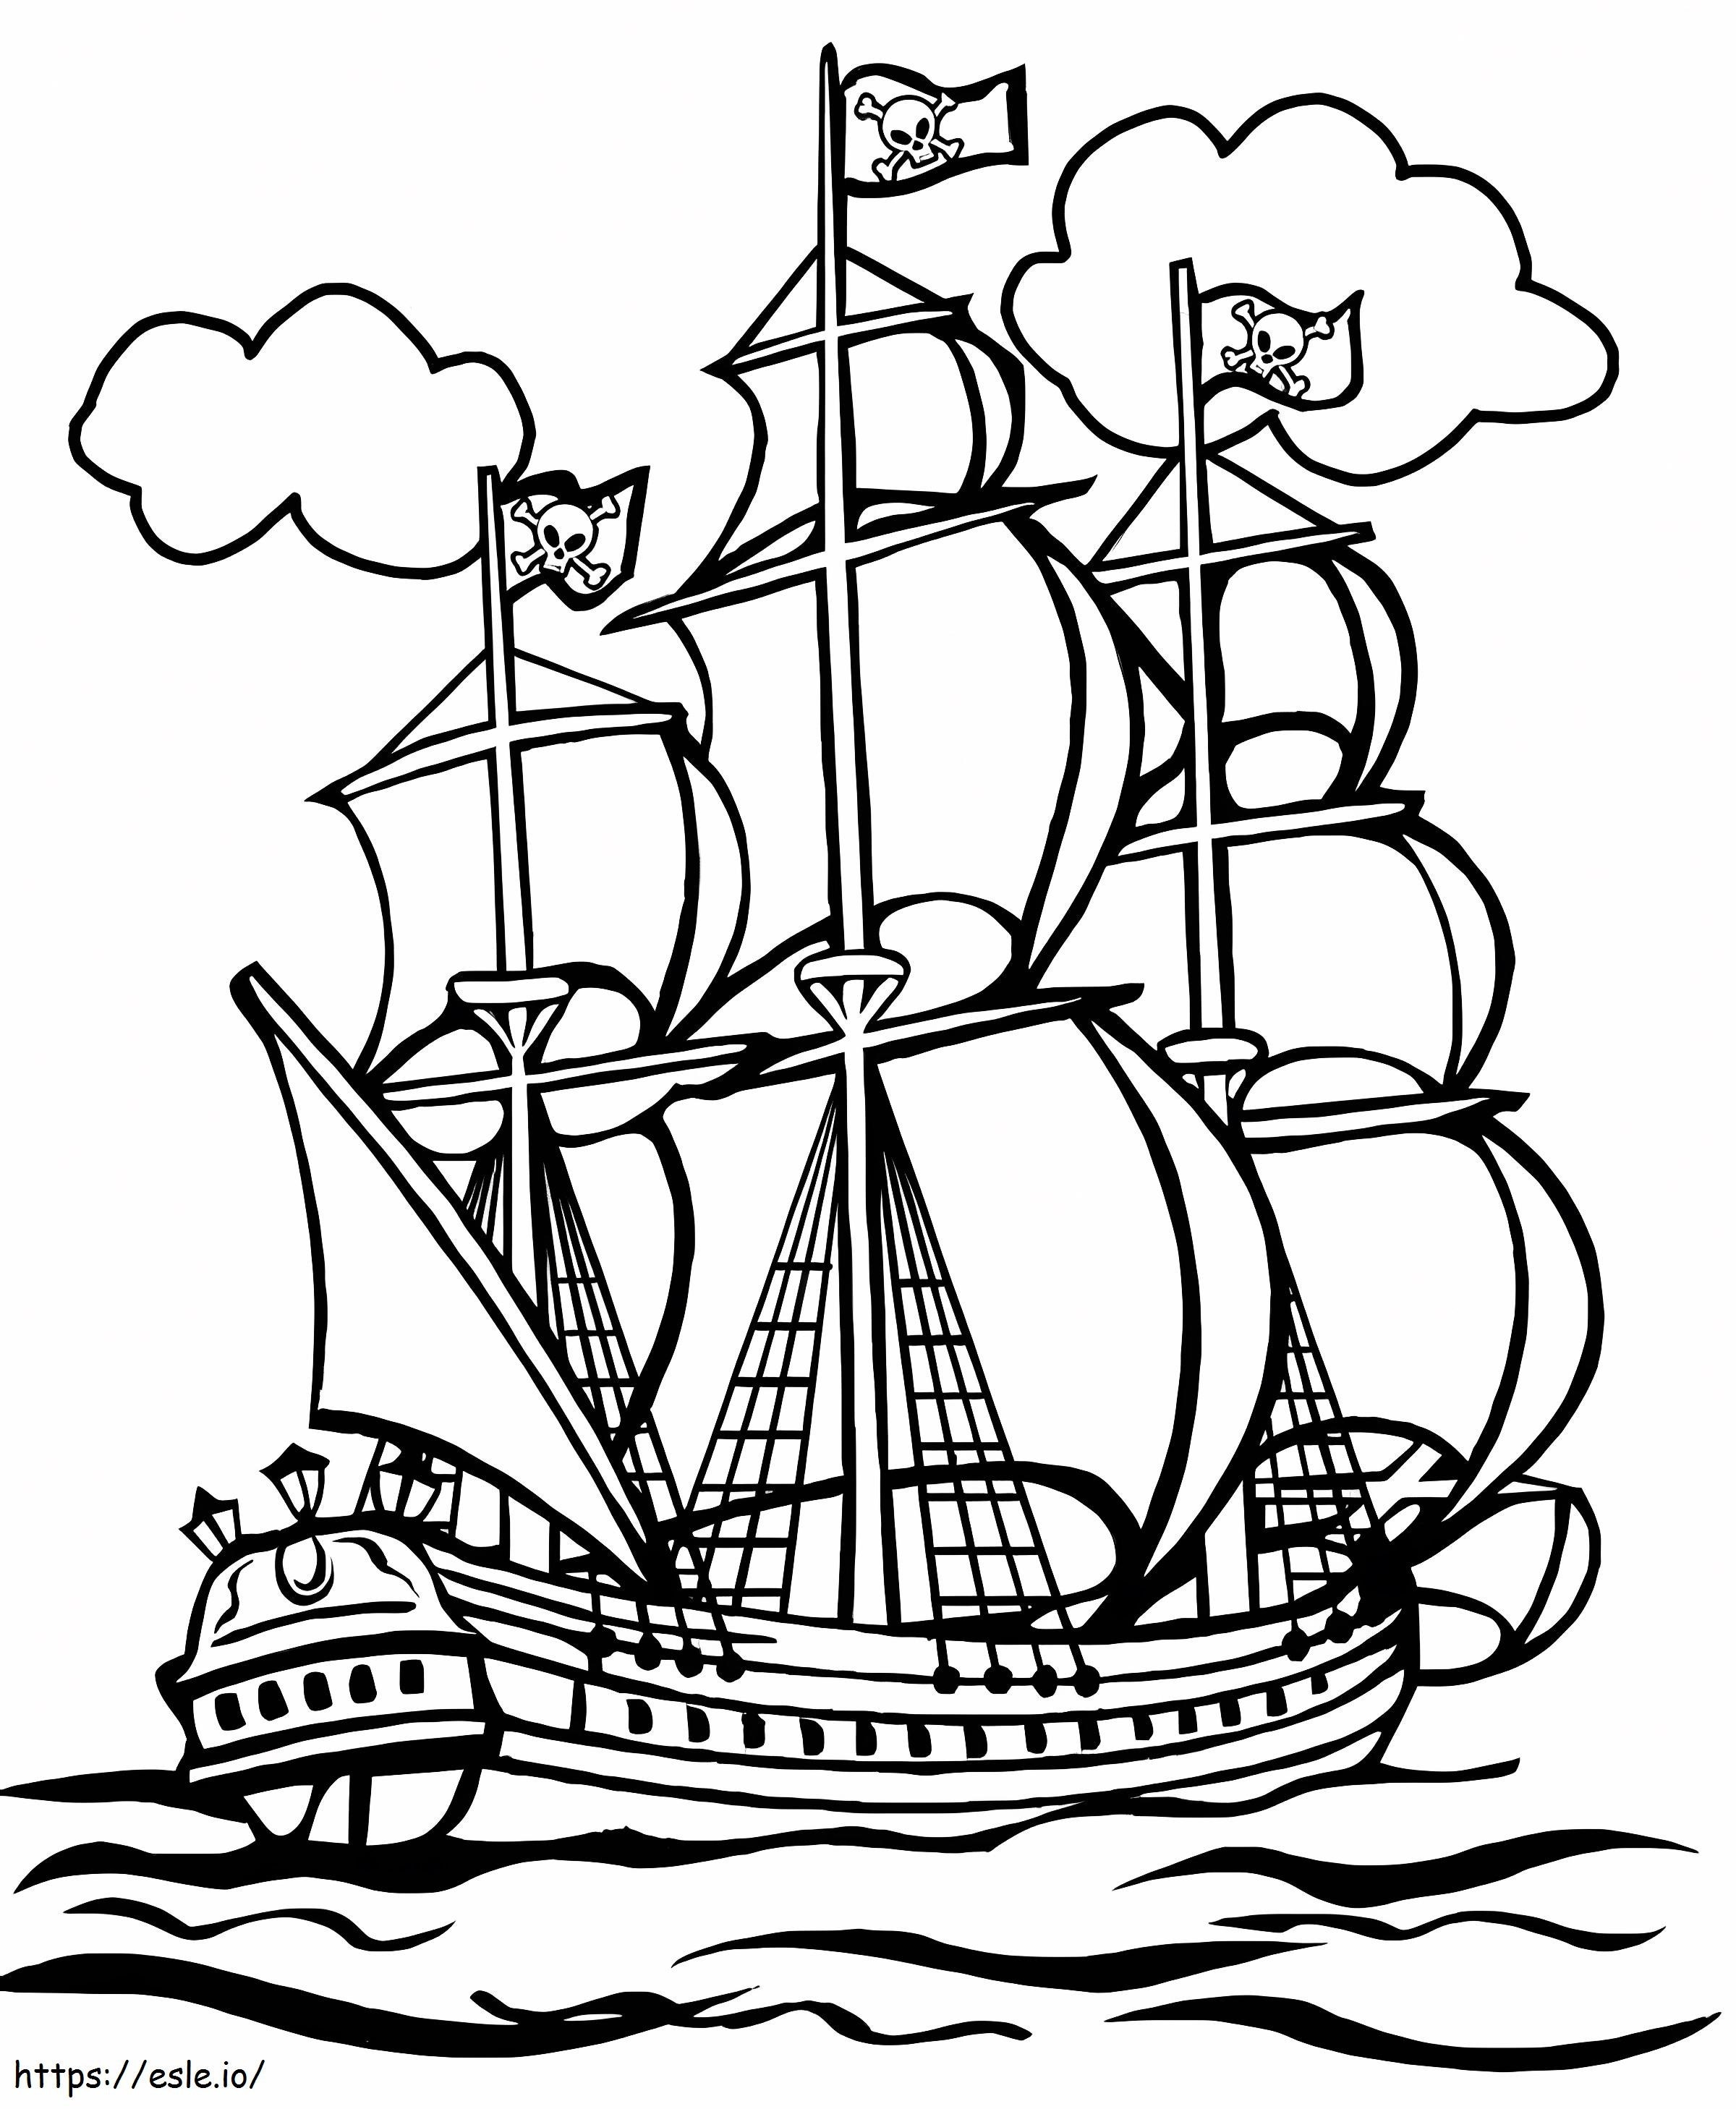 Pirate Ship coloring page